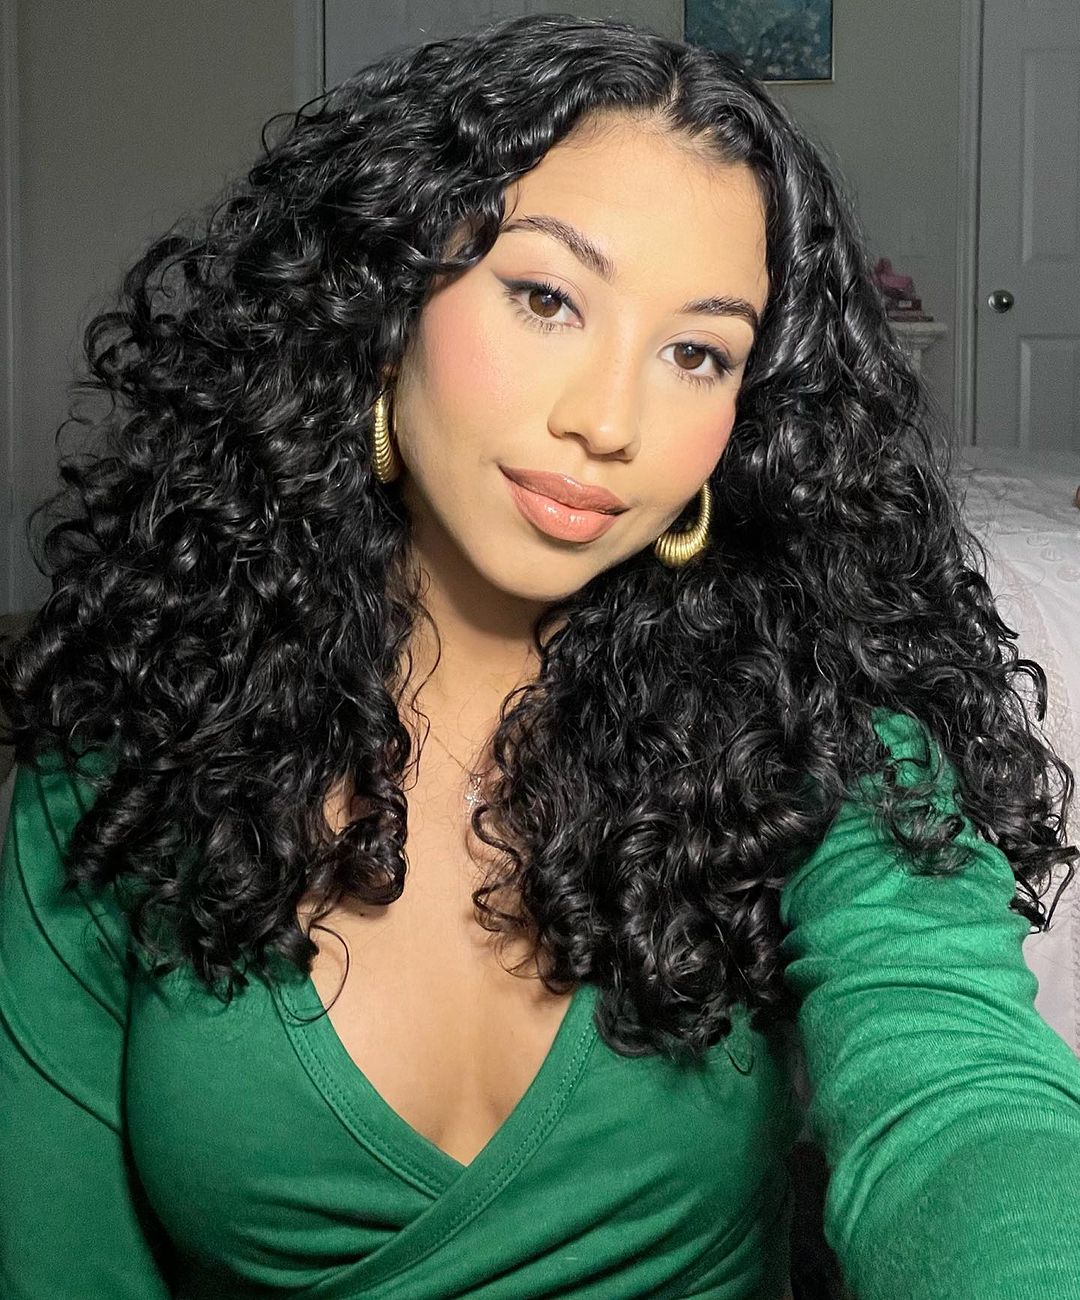 The Top Curly Hair Mistakes & How to Avoid Them in Your Hair Regimen